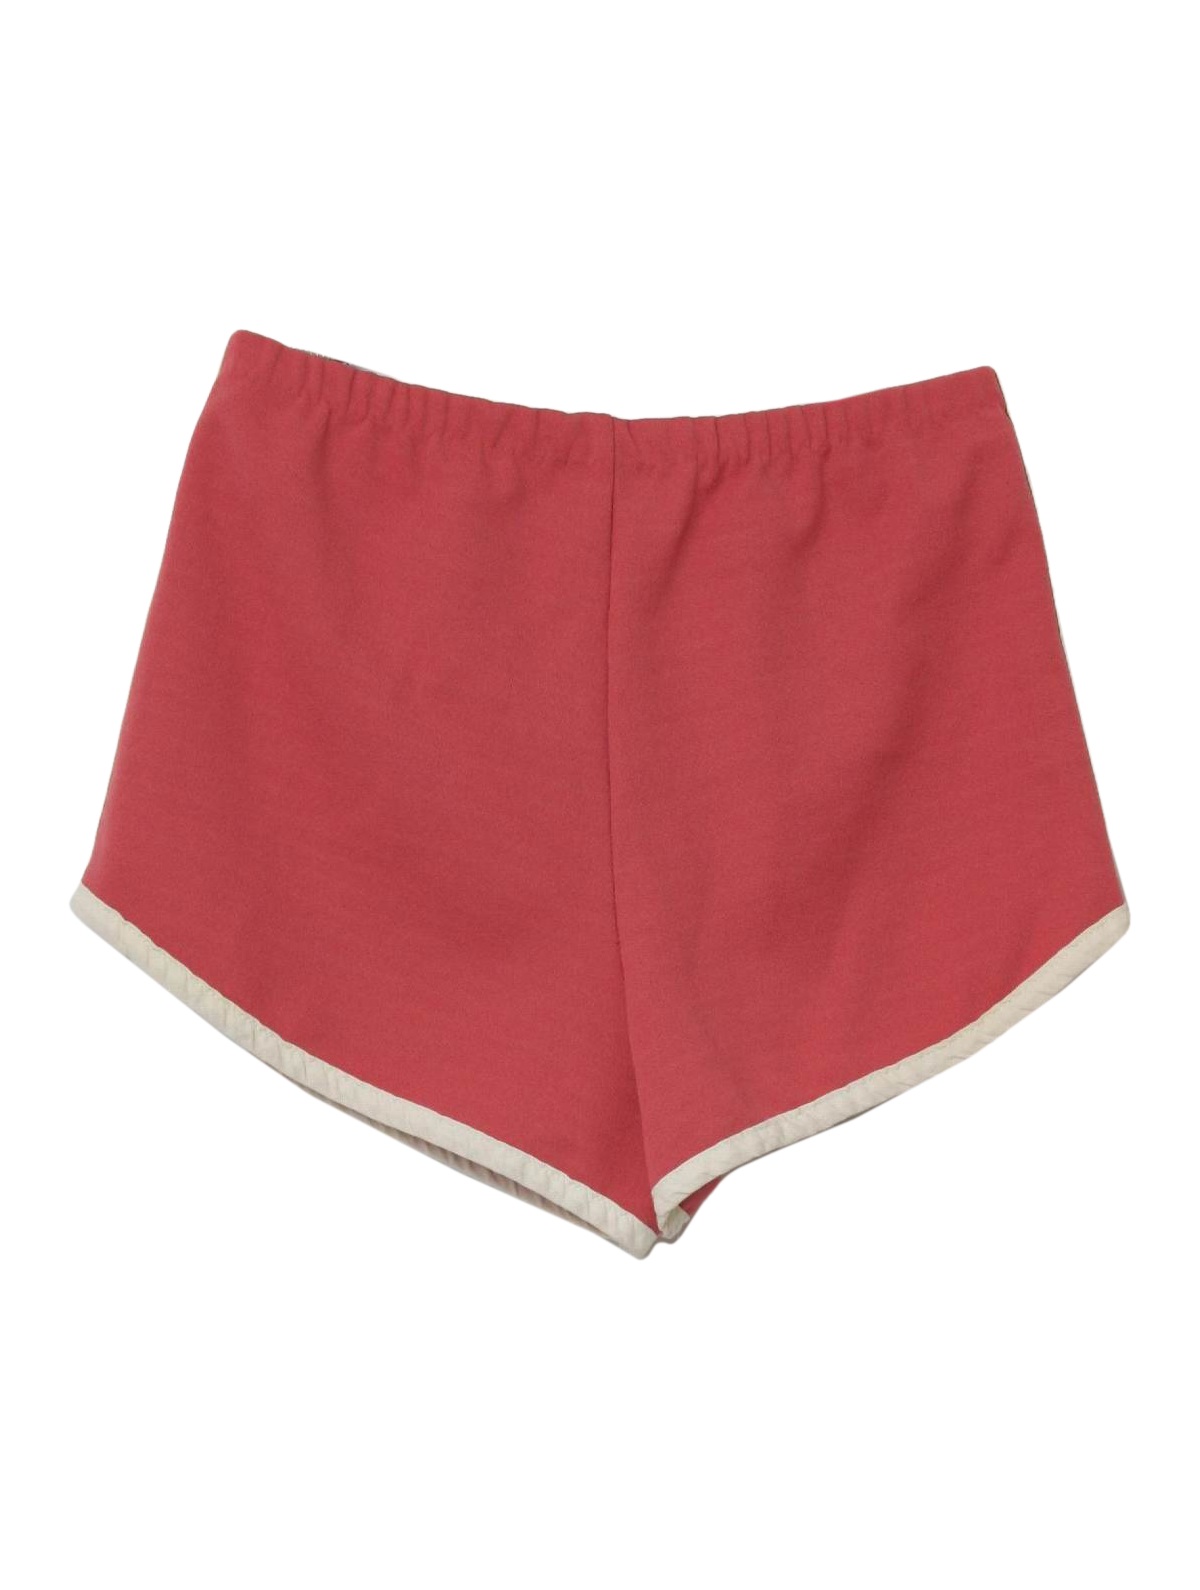 Retro 70s Shorts (Care Label) : 70s -Care Label- Womens dusty pink ...